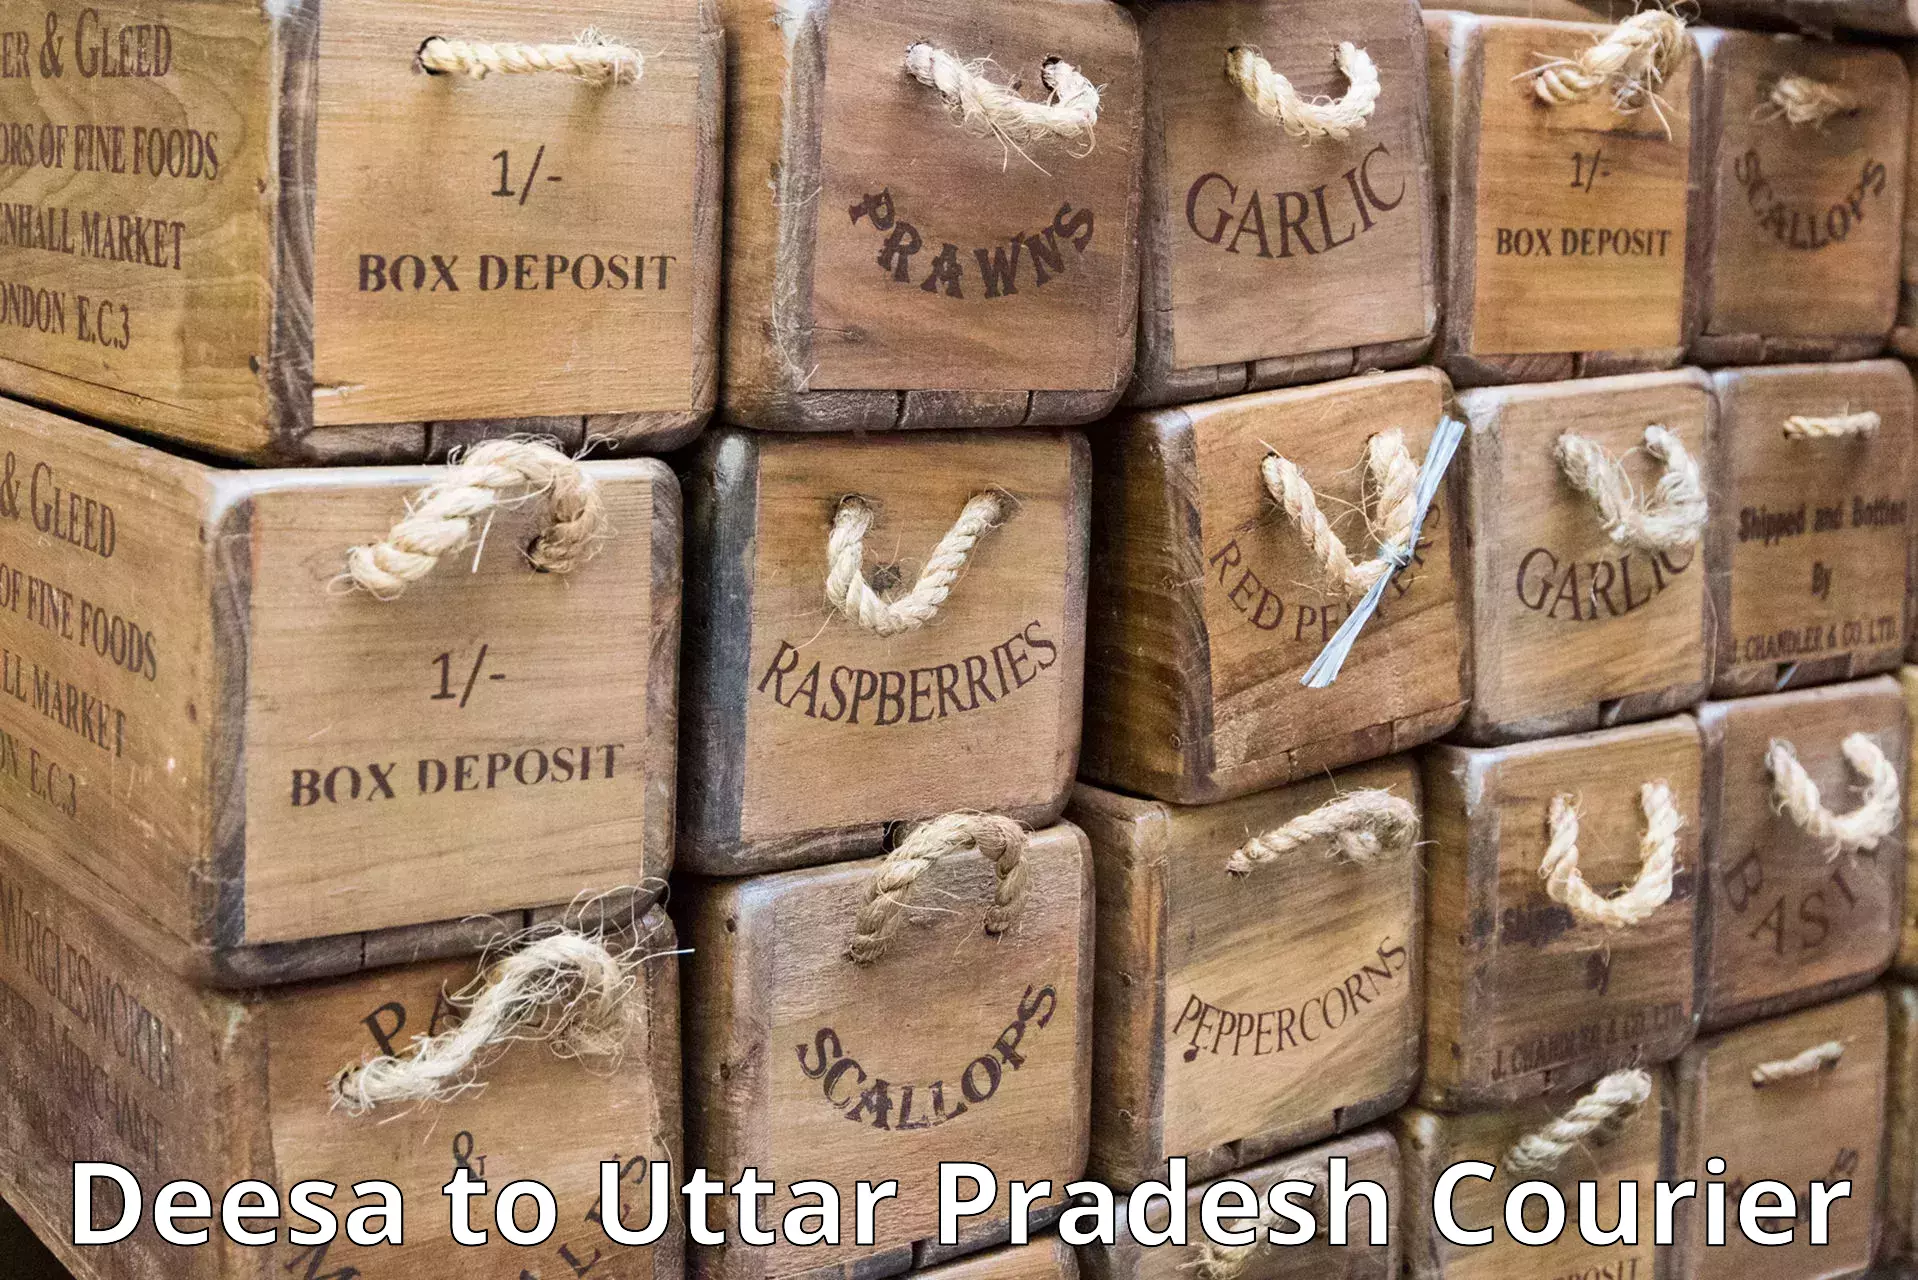 State-of-the-art courier technology Deesa to Lucknow